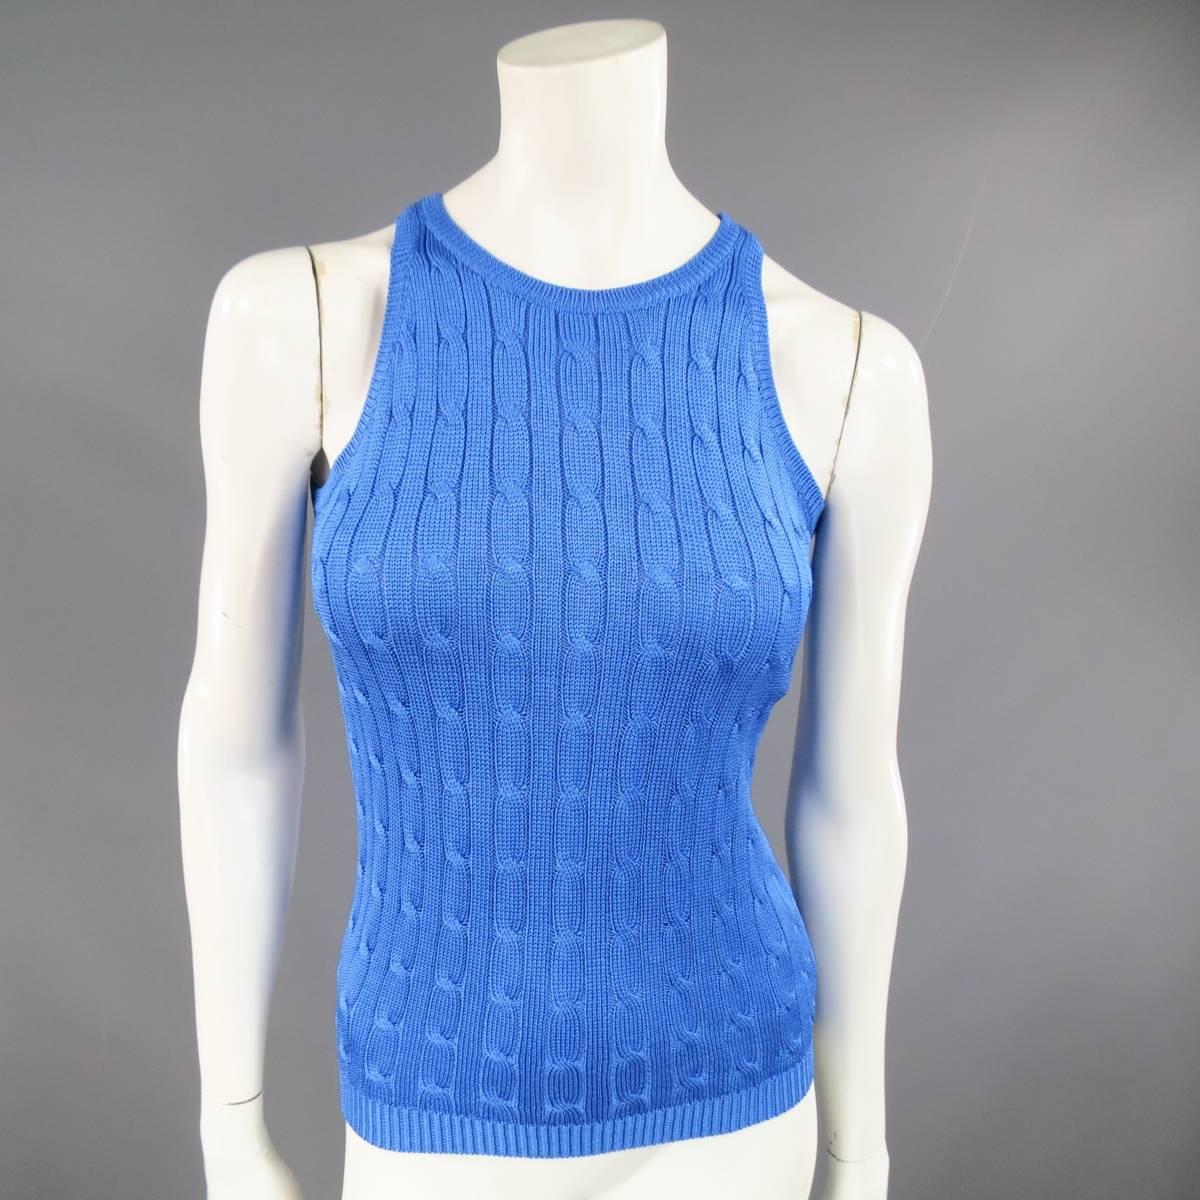 This RALPH LAUREN BLACK LABEL sweater set comes in shiny metallic blue silk cable knit and includes a cardigan and matching sleeveless top.

Excellent Pre-Owned Condition.
Marked: S

Measurements:

-Top-
Shoulder:  10 in.
Bust: 32